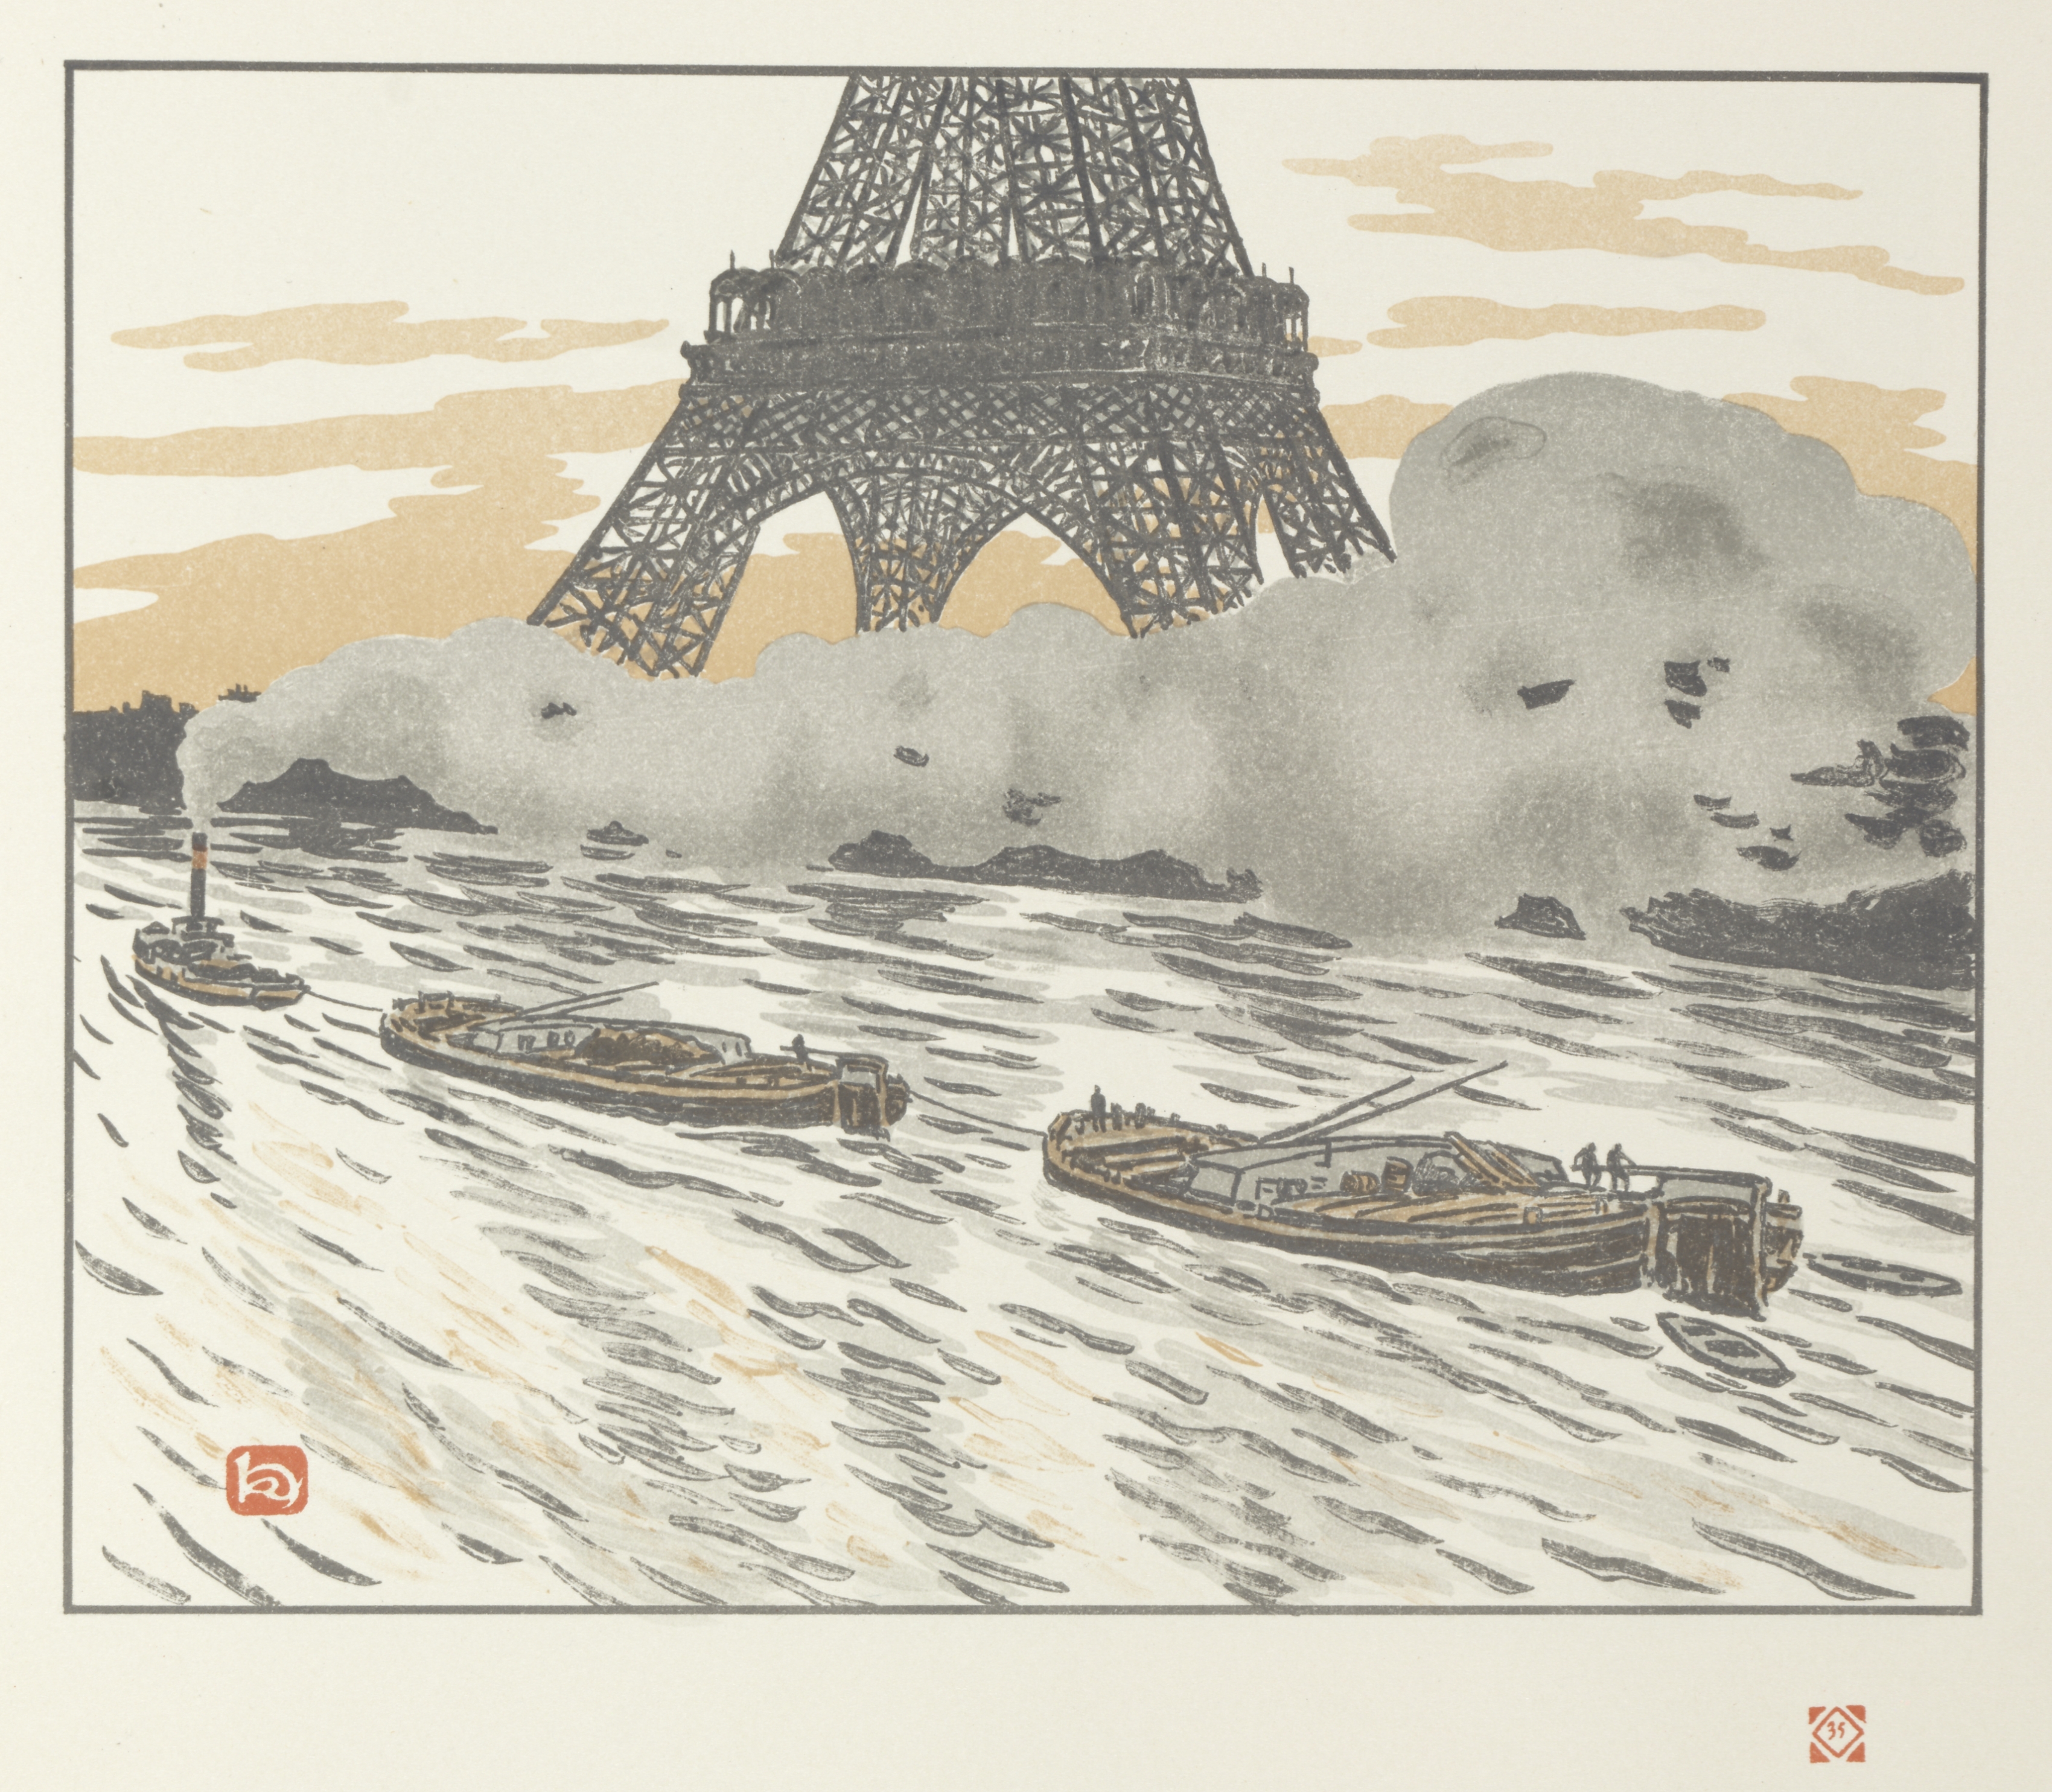 Thirty-Six Views of the Eiffel Tower: Les péniches